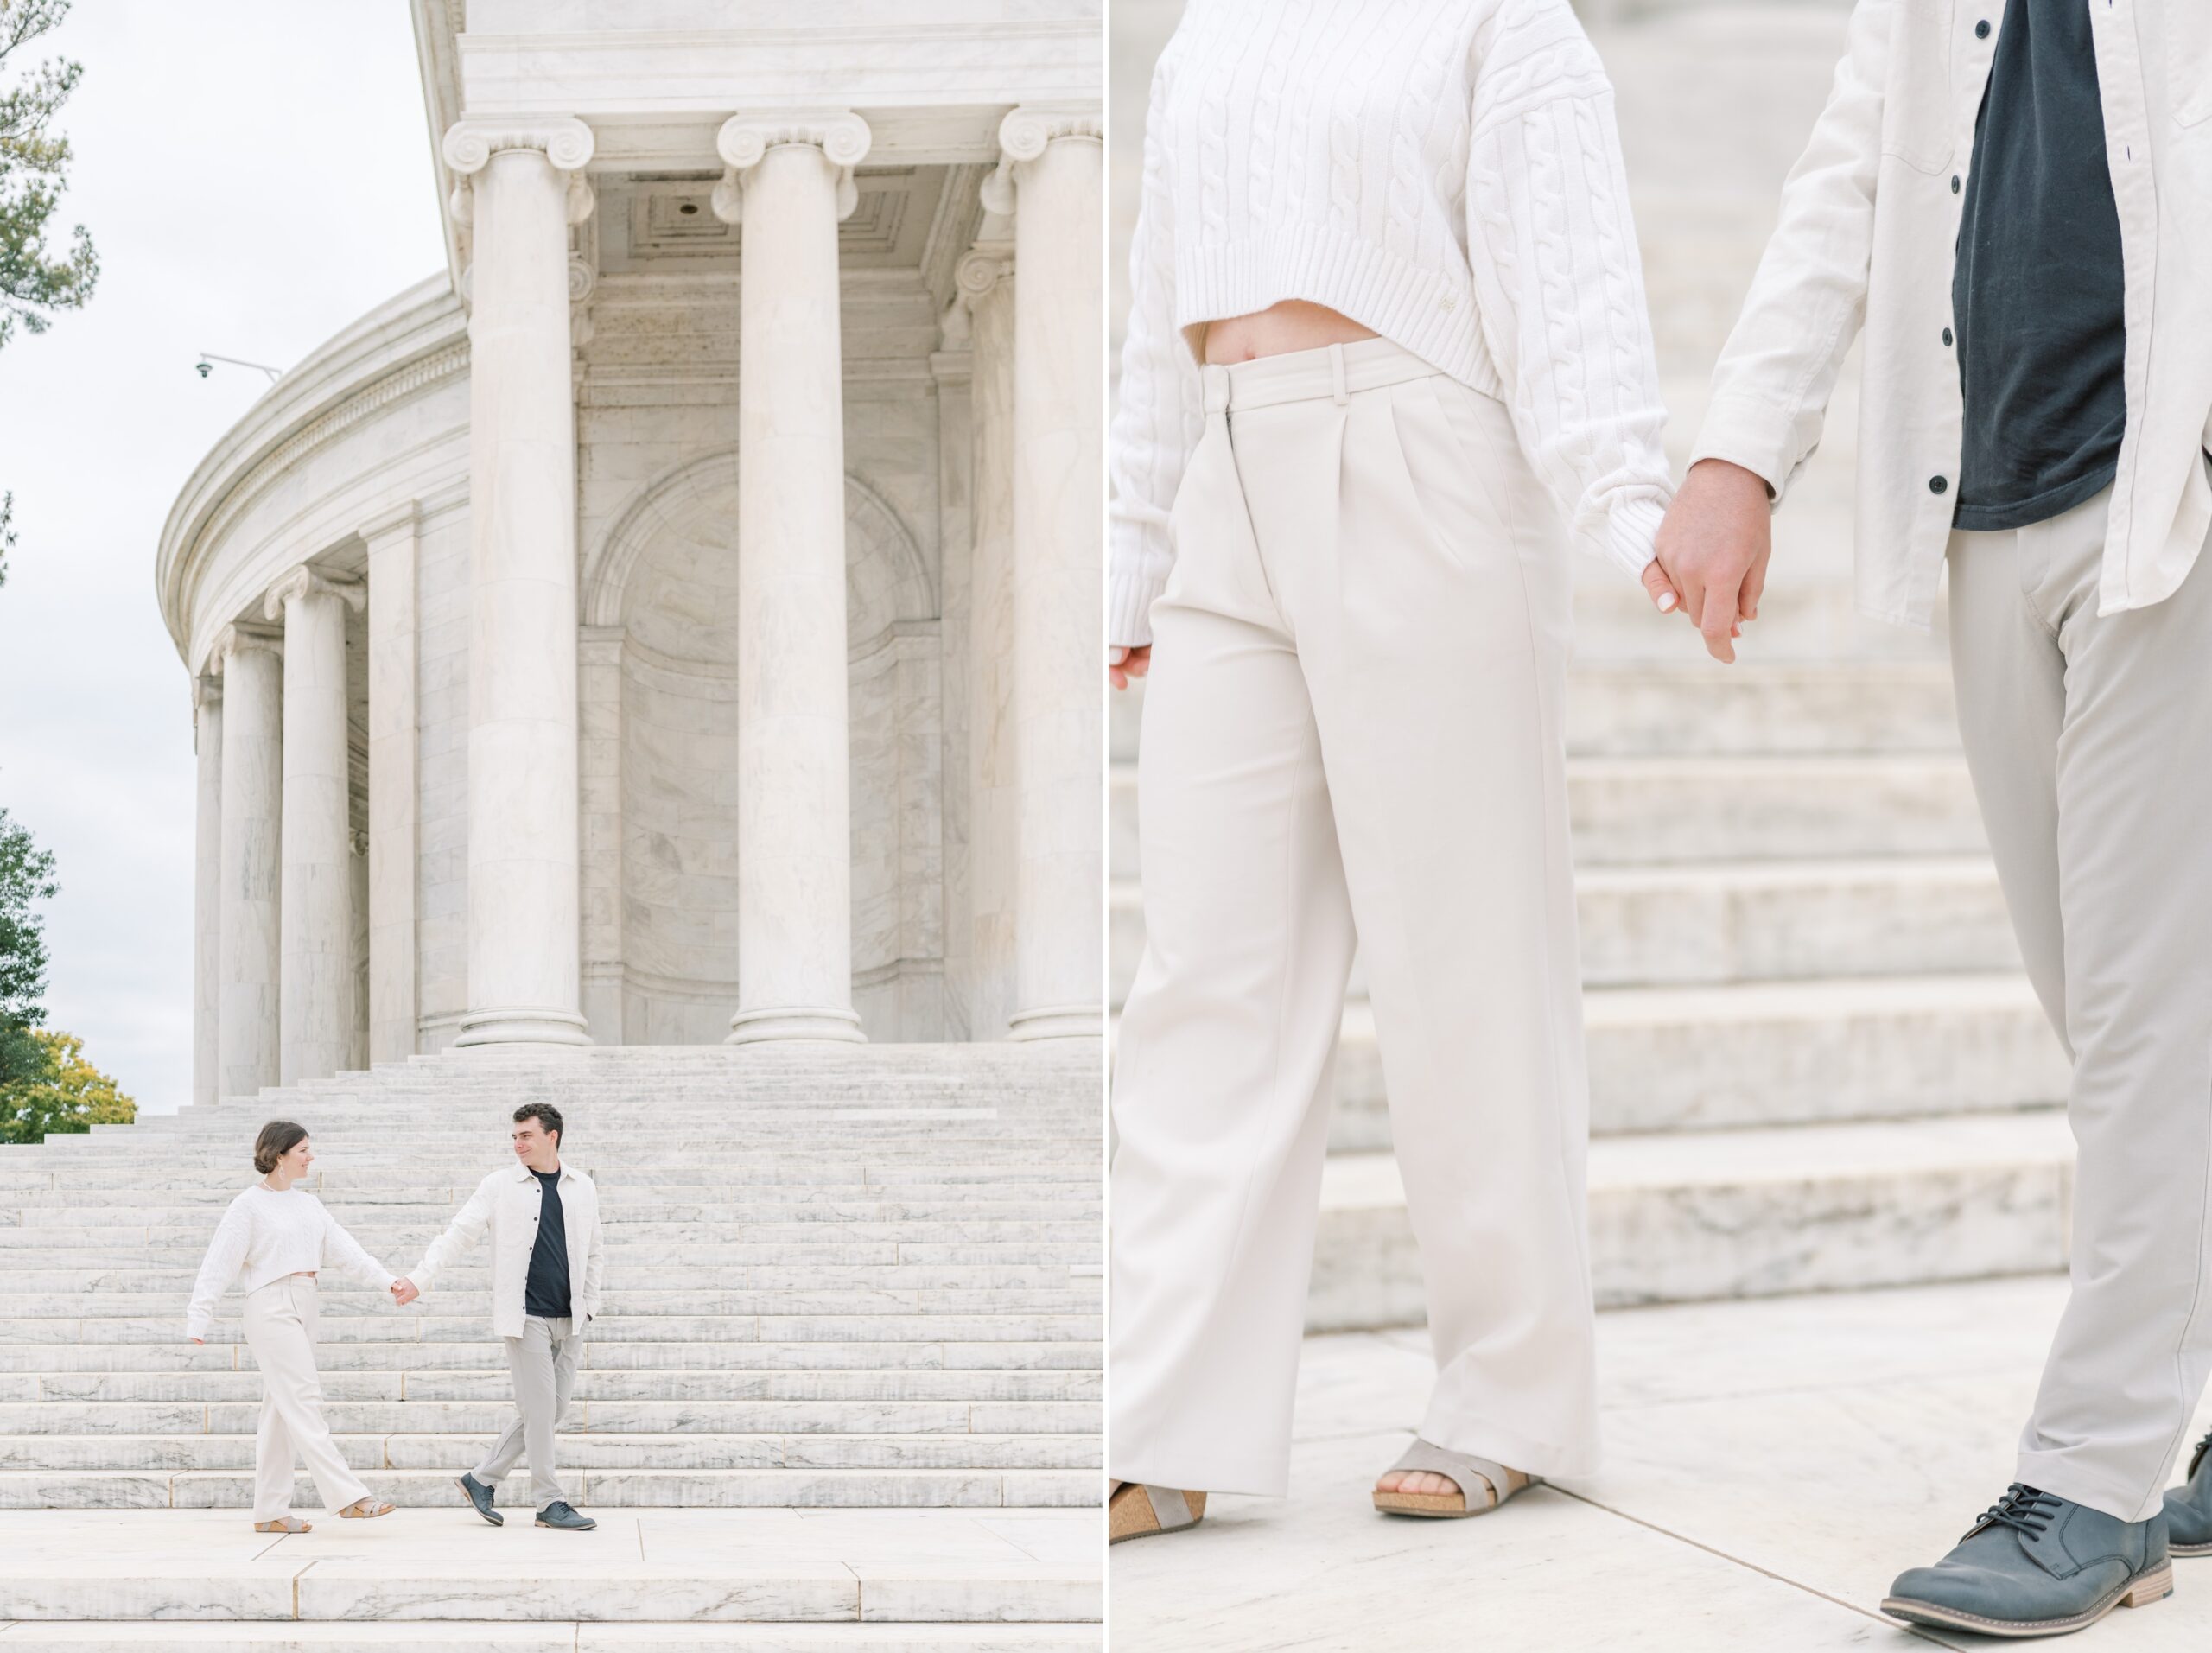 Fall engagement photos captured at the Jefferson Memorial in Washington, DC.